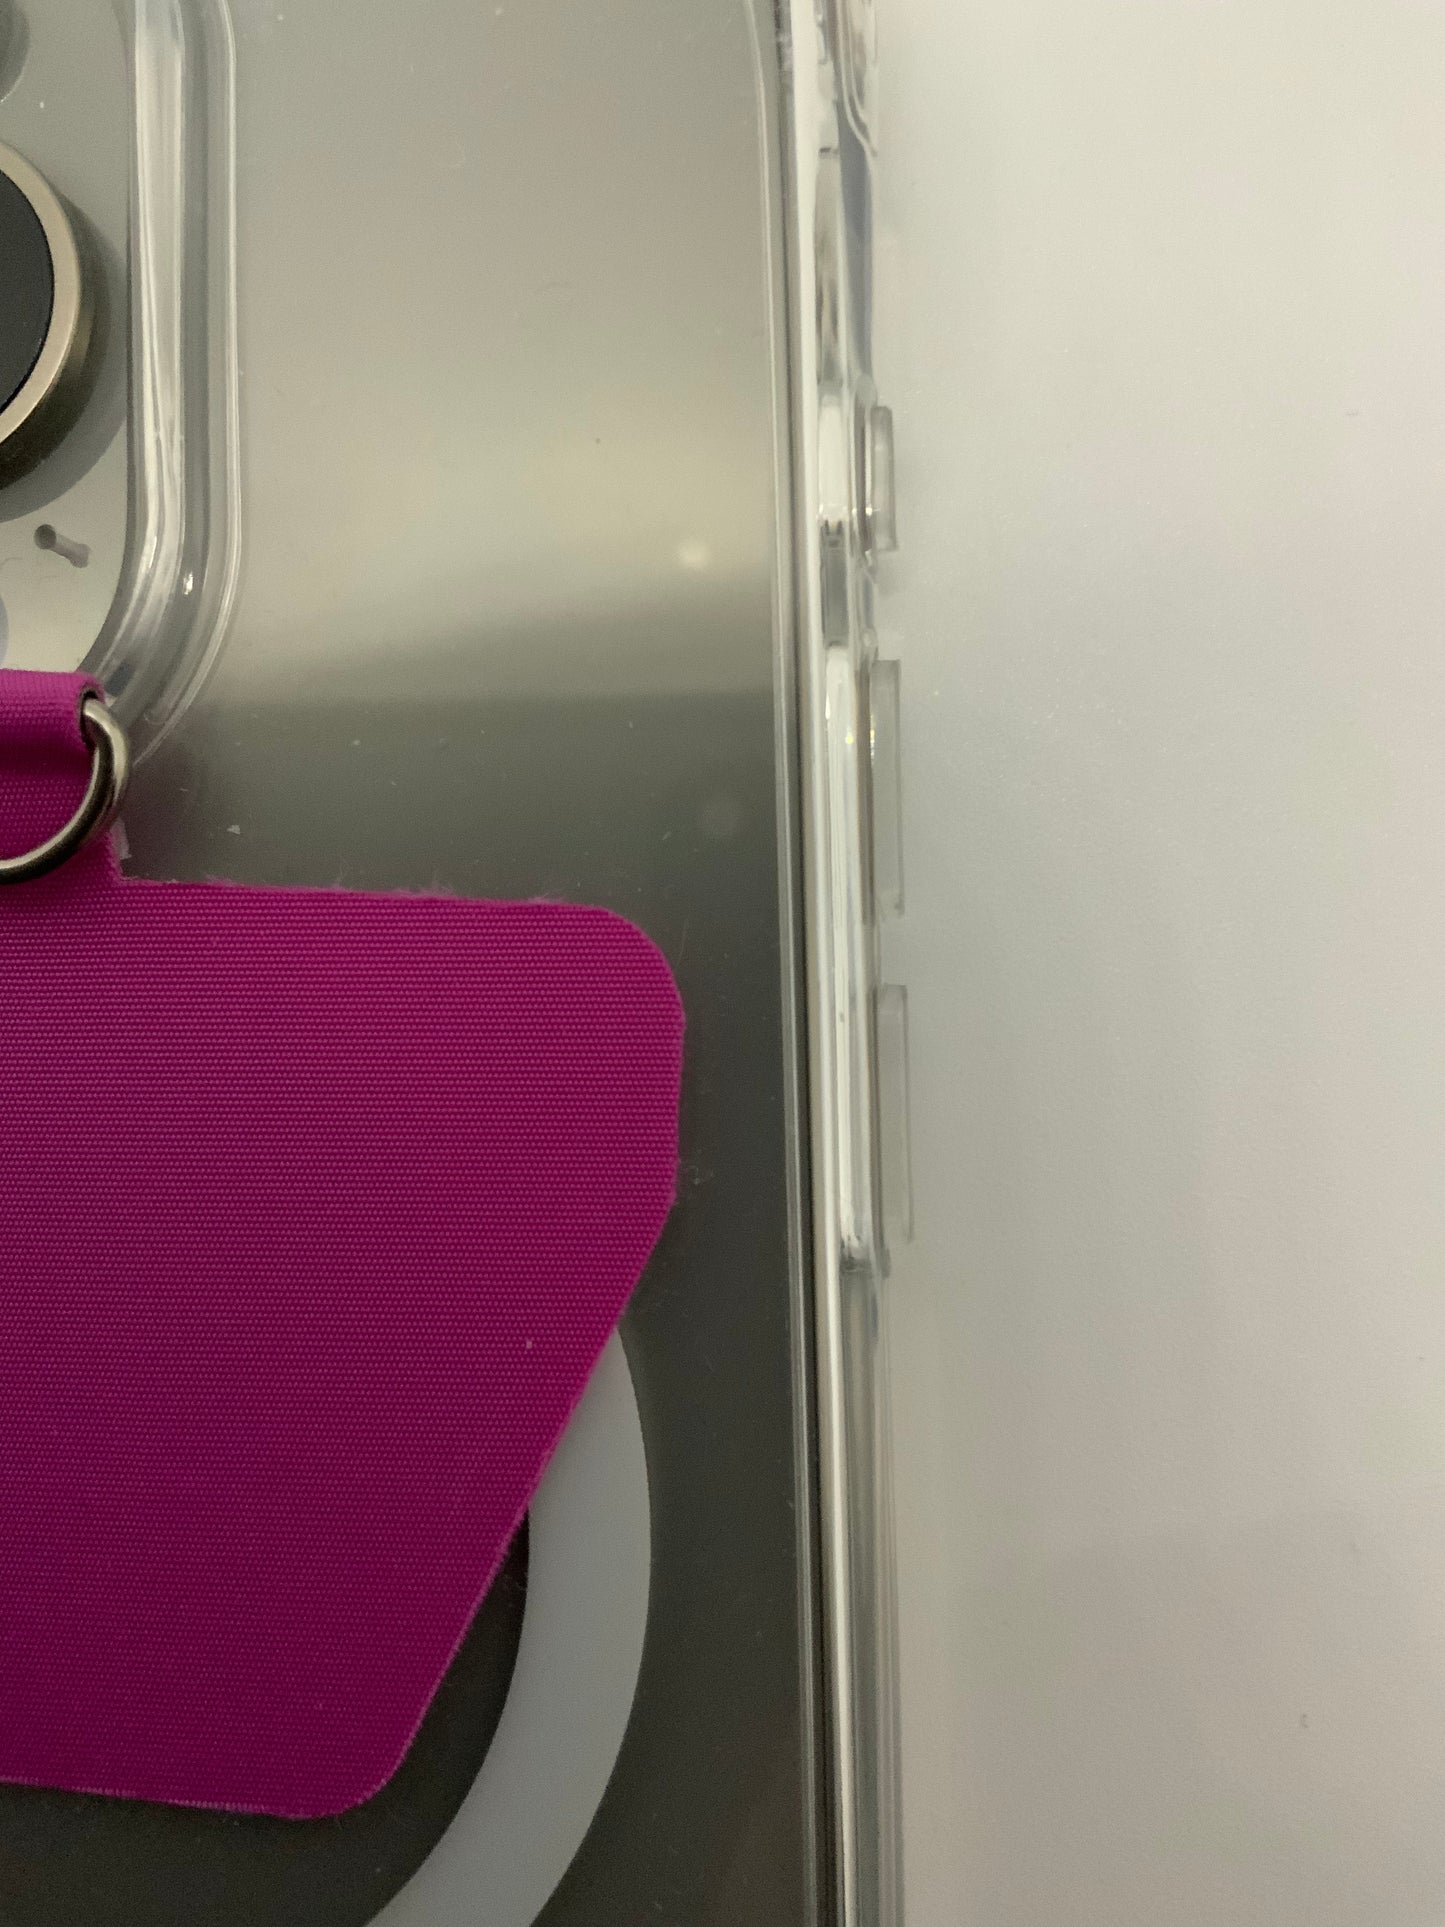 Be My AI: The picture shows a close-up of a few objects. On the left side, there is a clear plastic case with a silver ring attached to it. The ring has a purple strap connected to it. The plastic case seems to have a transparent cover and a clip on its side. On the right side of the image, there is a white surface. The bottom left corner shows a part of something that is black with a circular shape, but it's not fully visible in the picture.